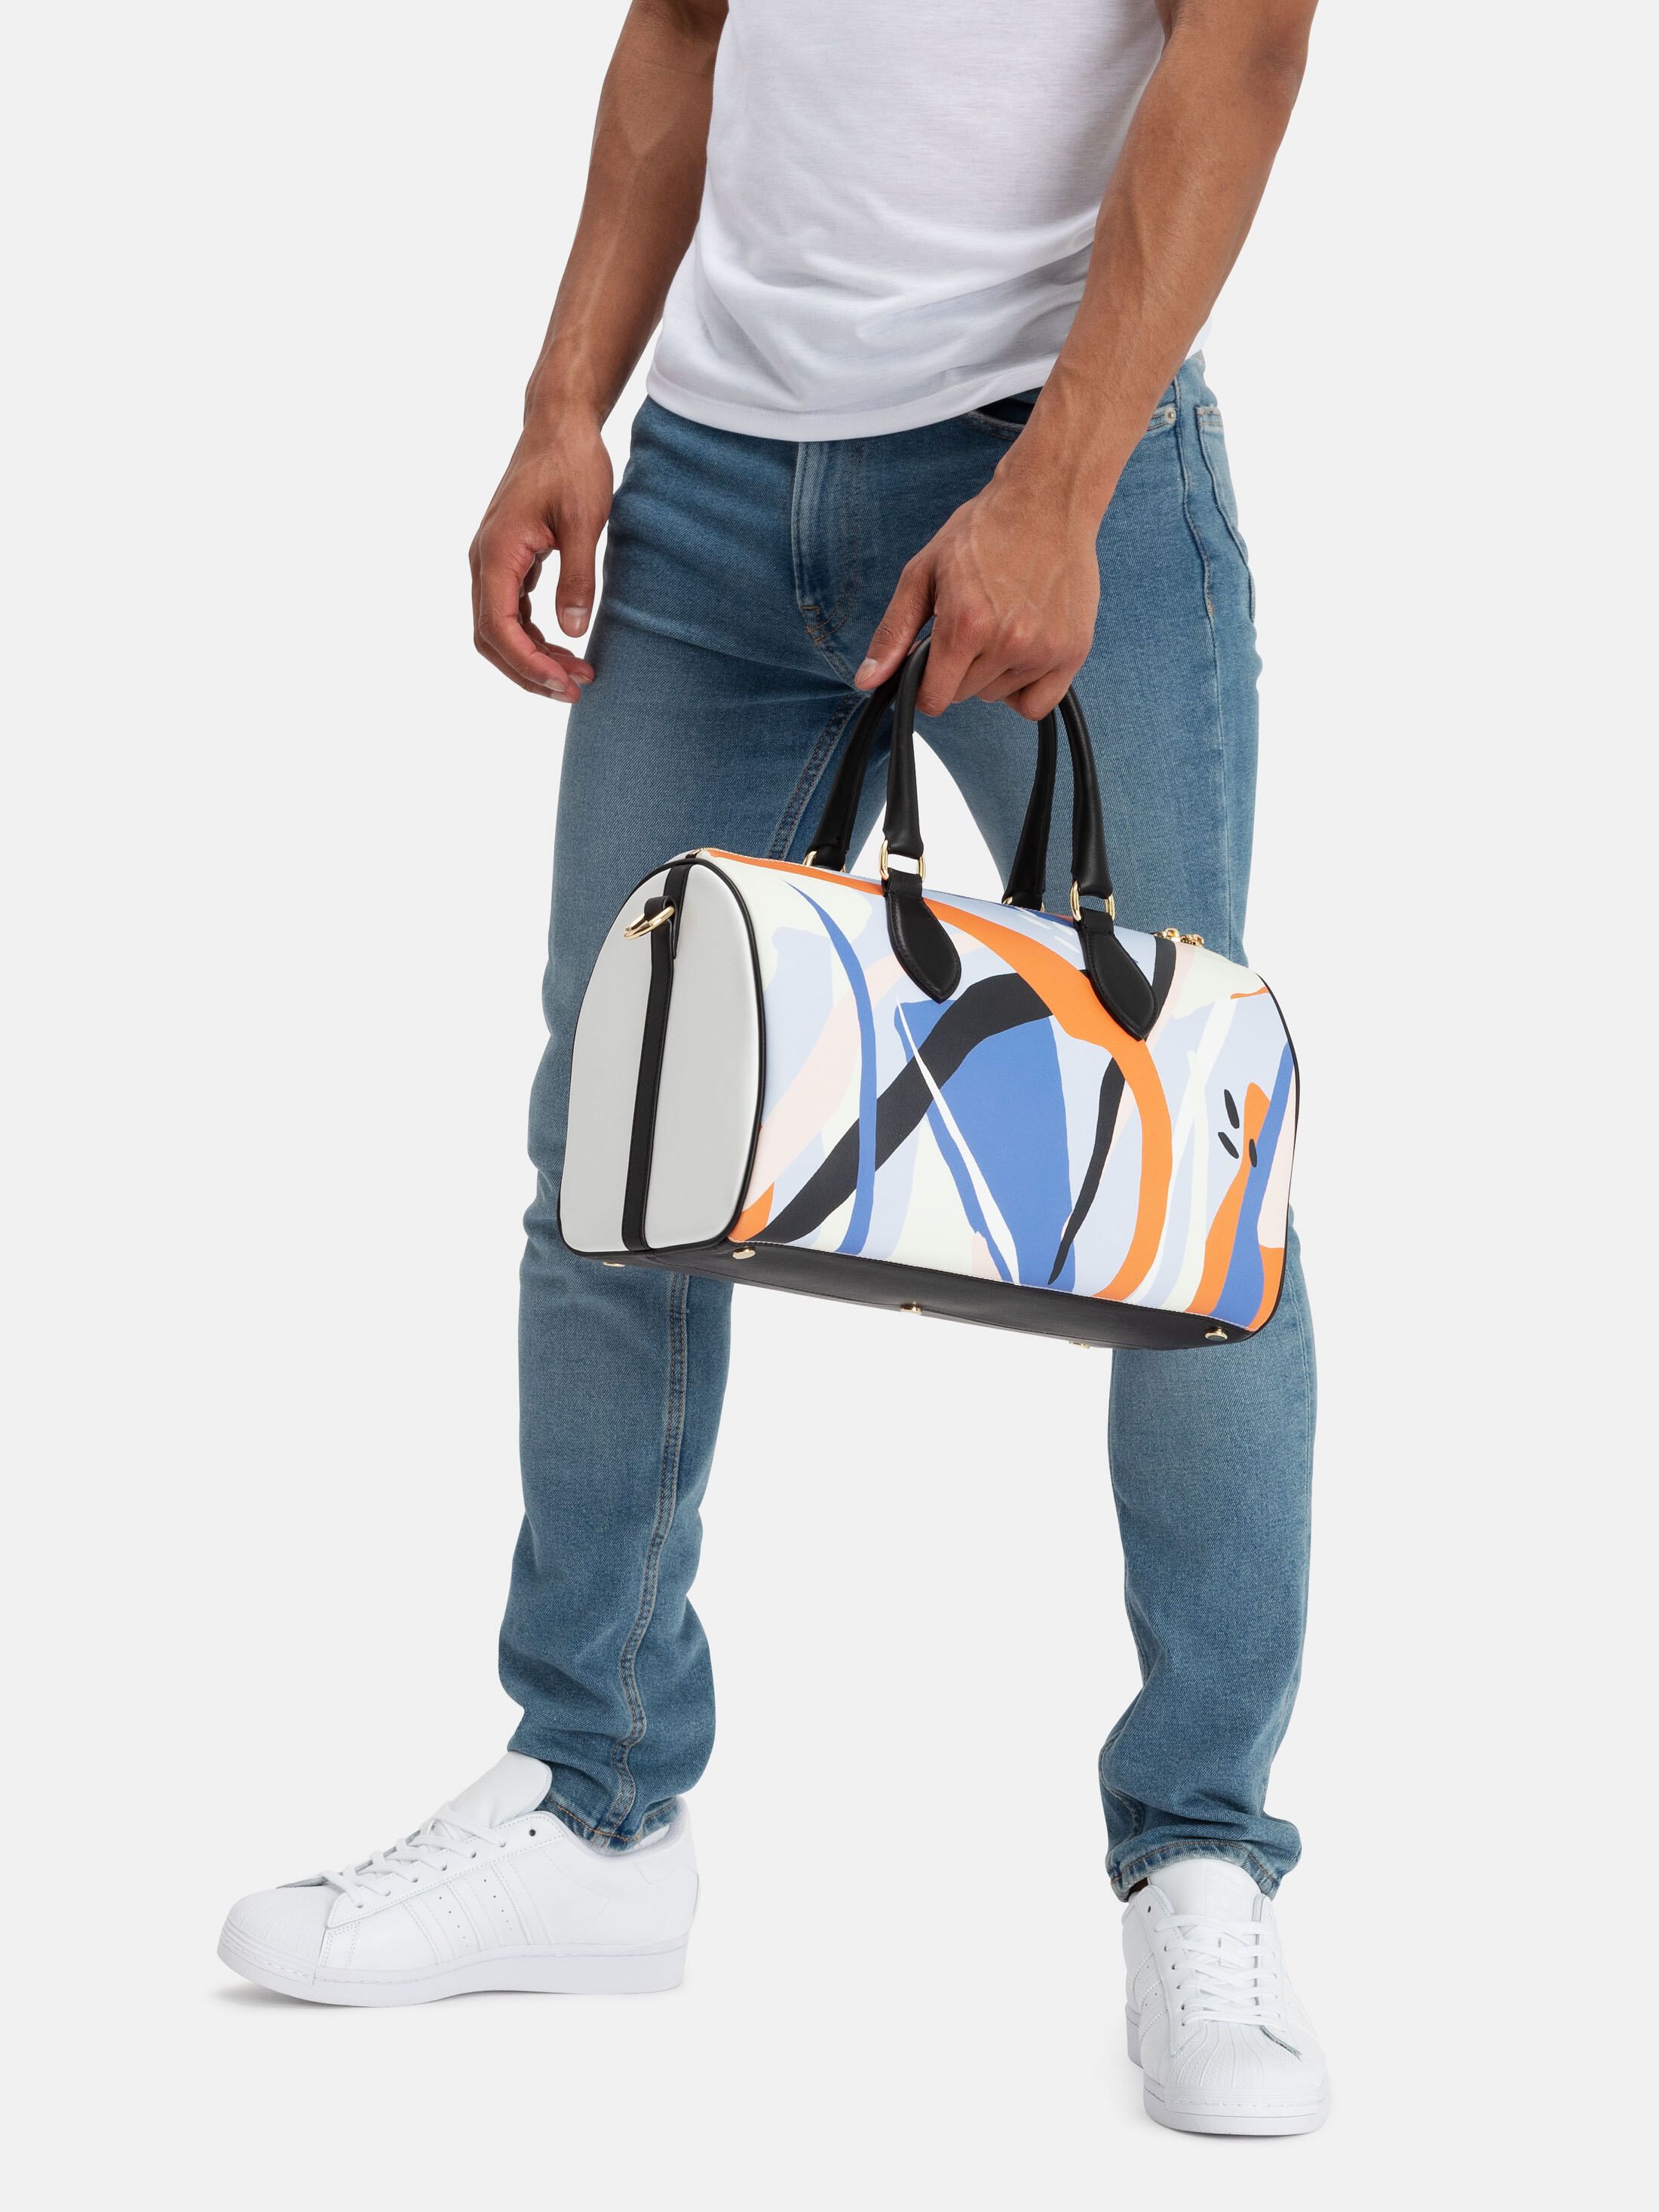 design your own duffle bag